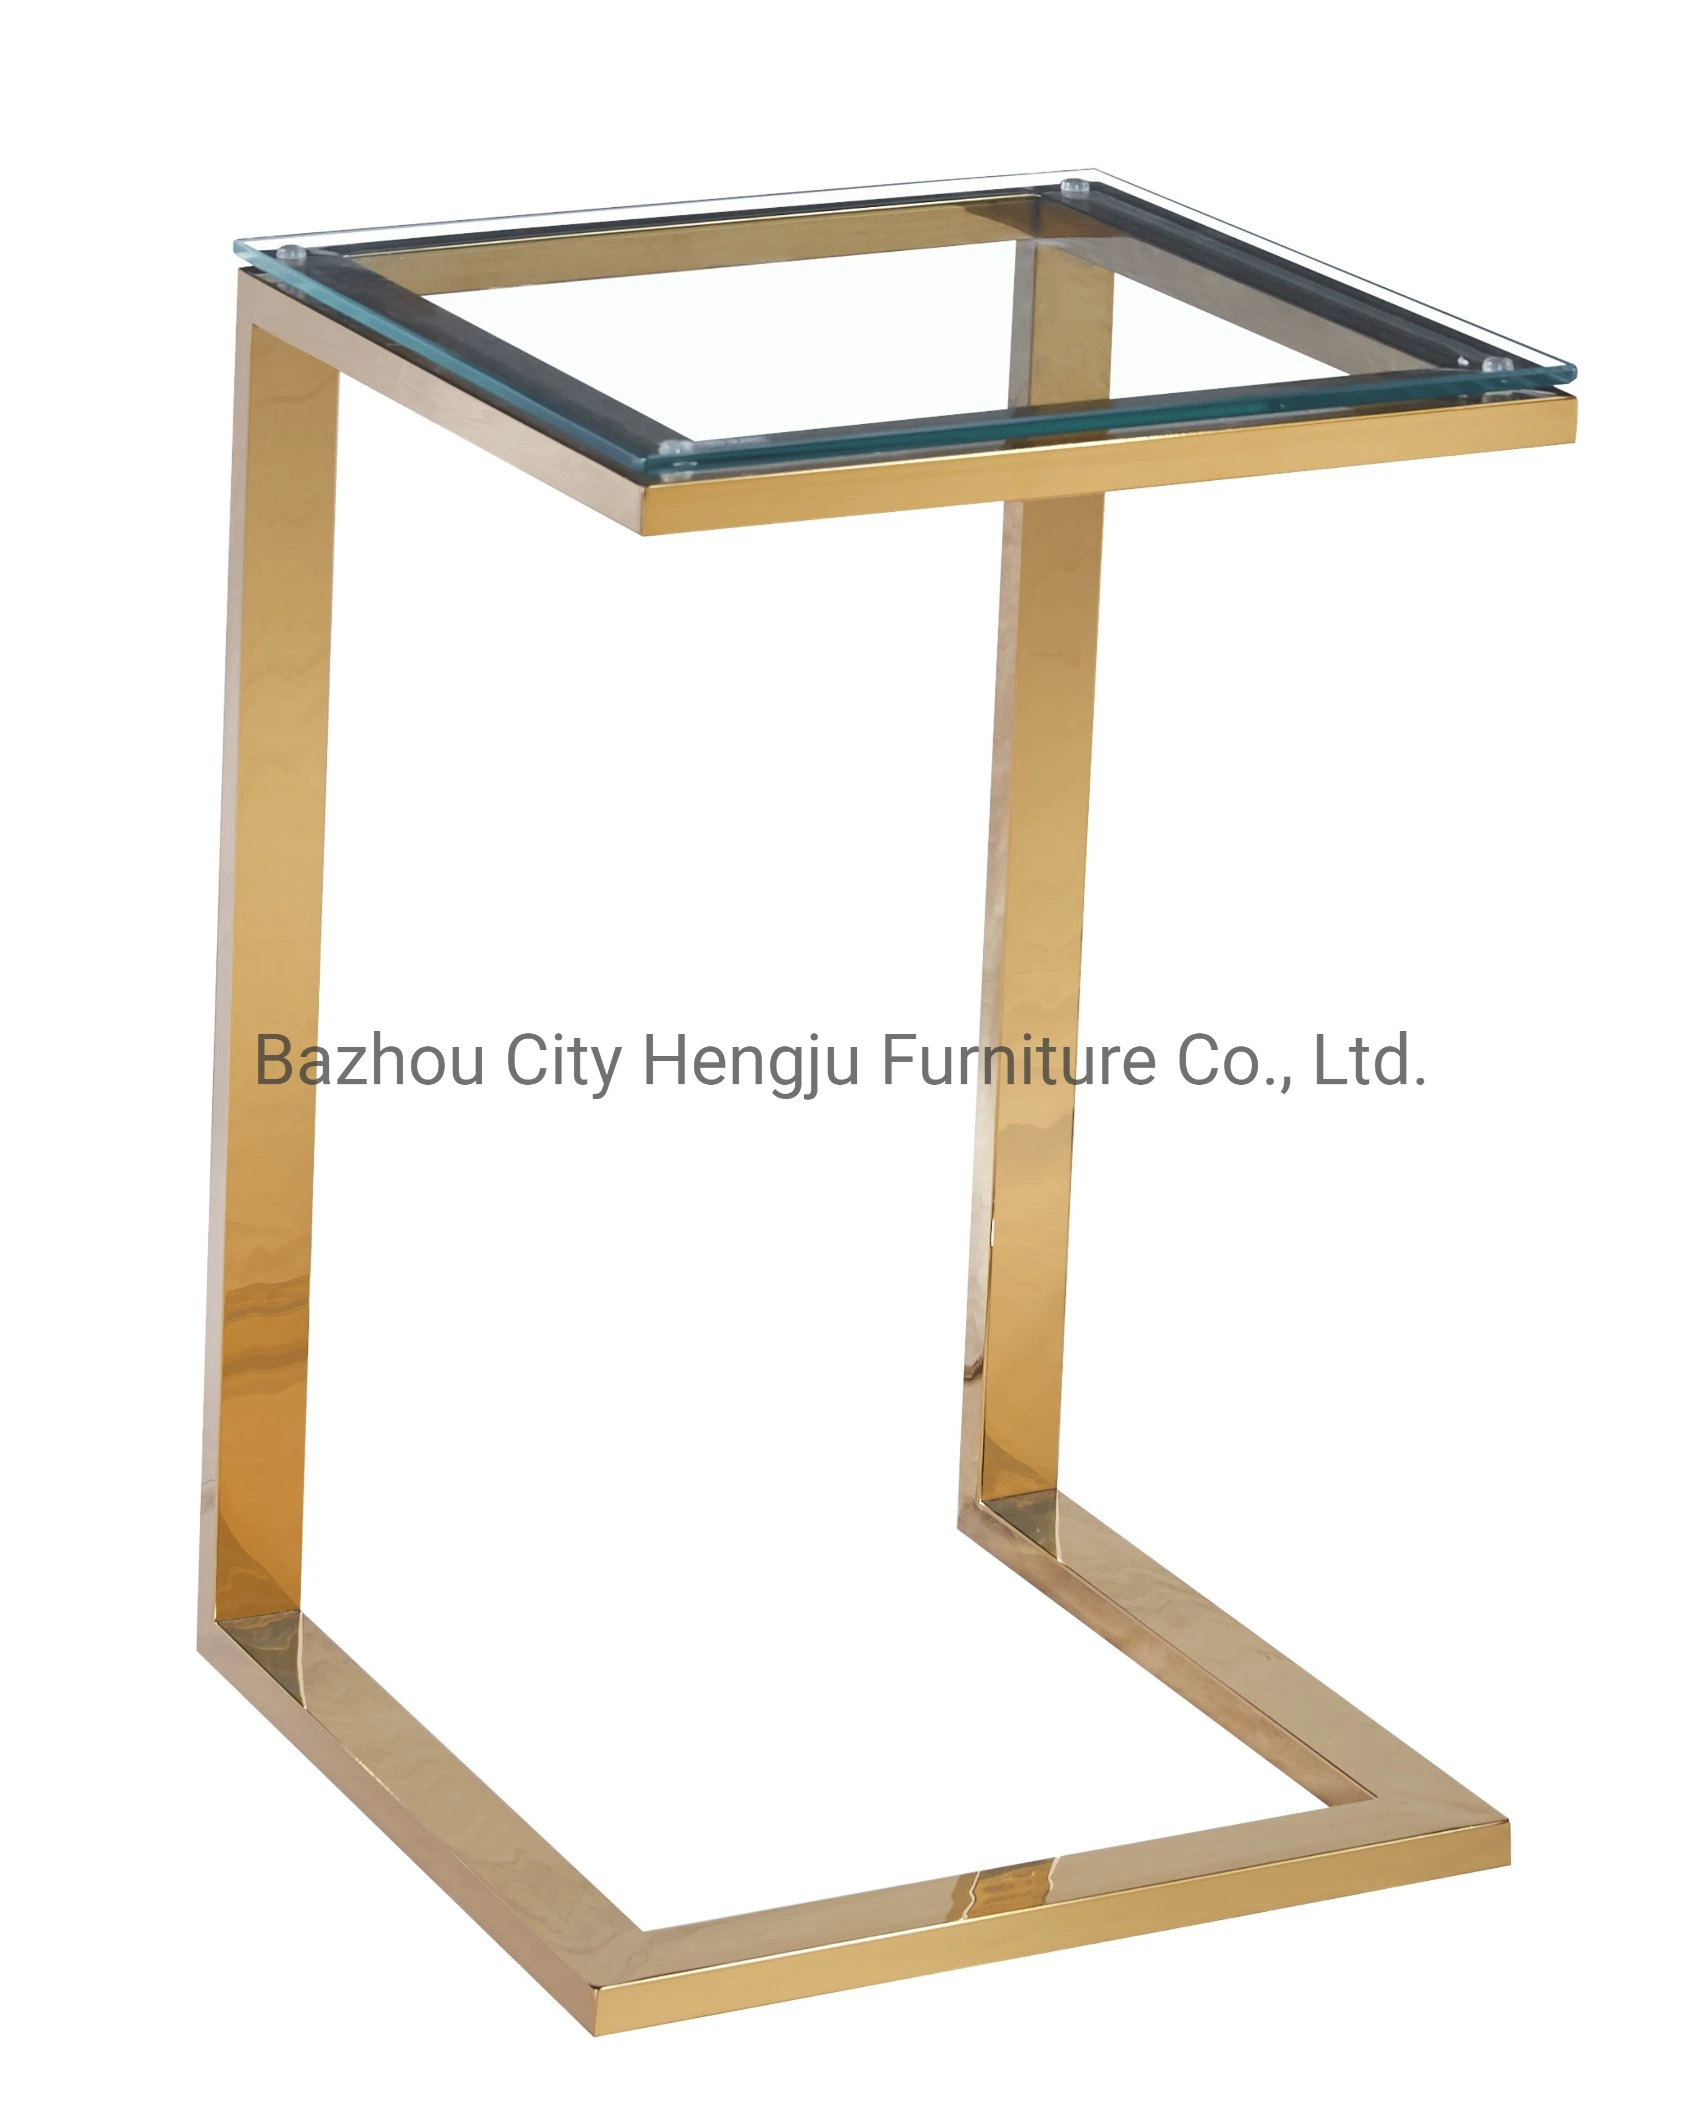 Stainless Steel Table Suit Living Room Furniture Glass End Tables Sofa Table Side Table Bedroom Table Wedding Table